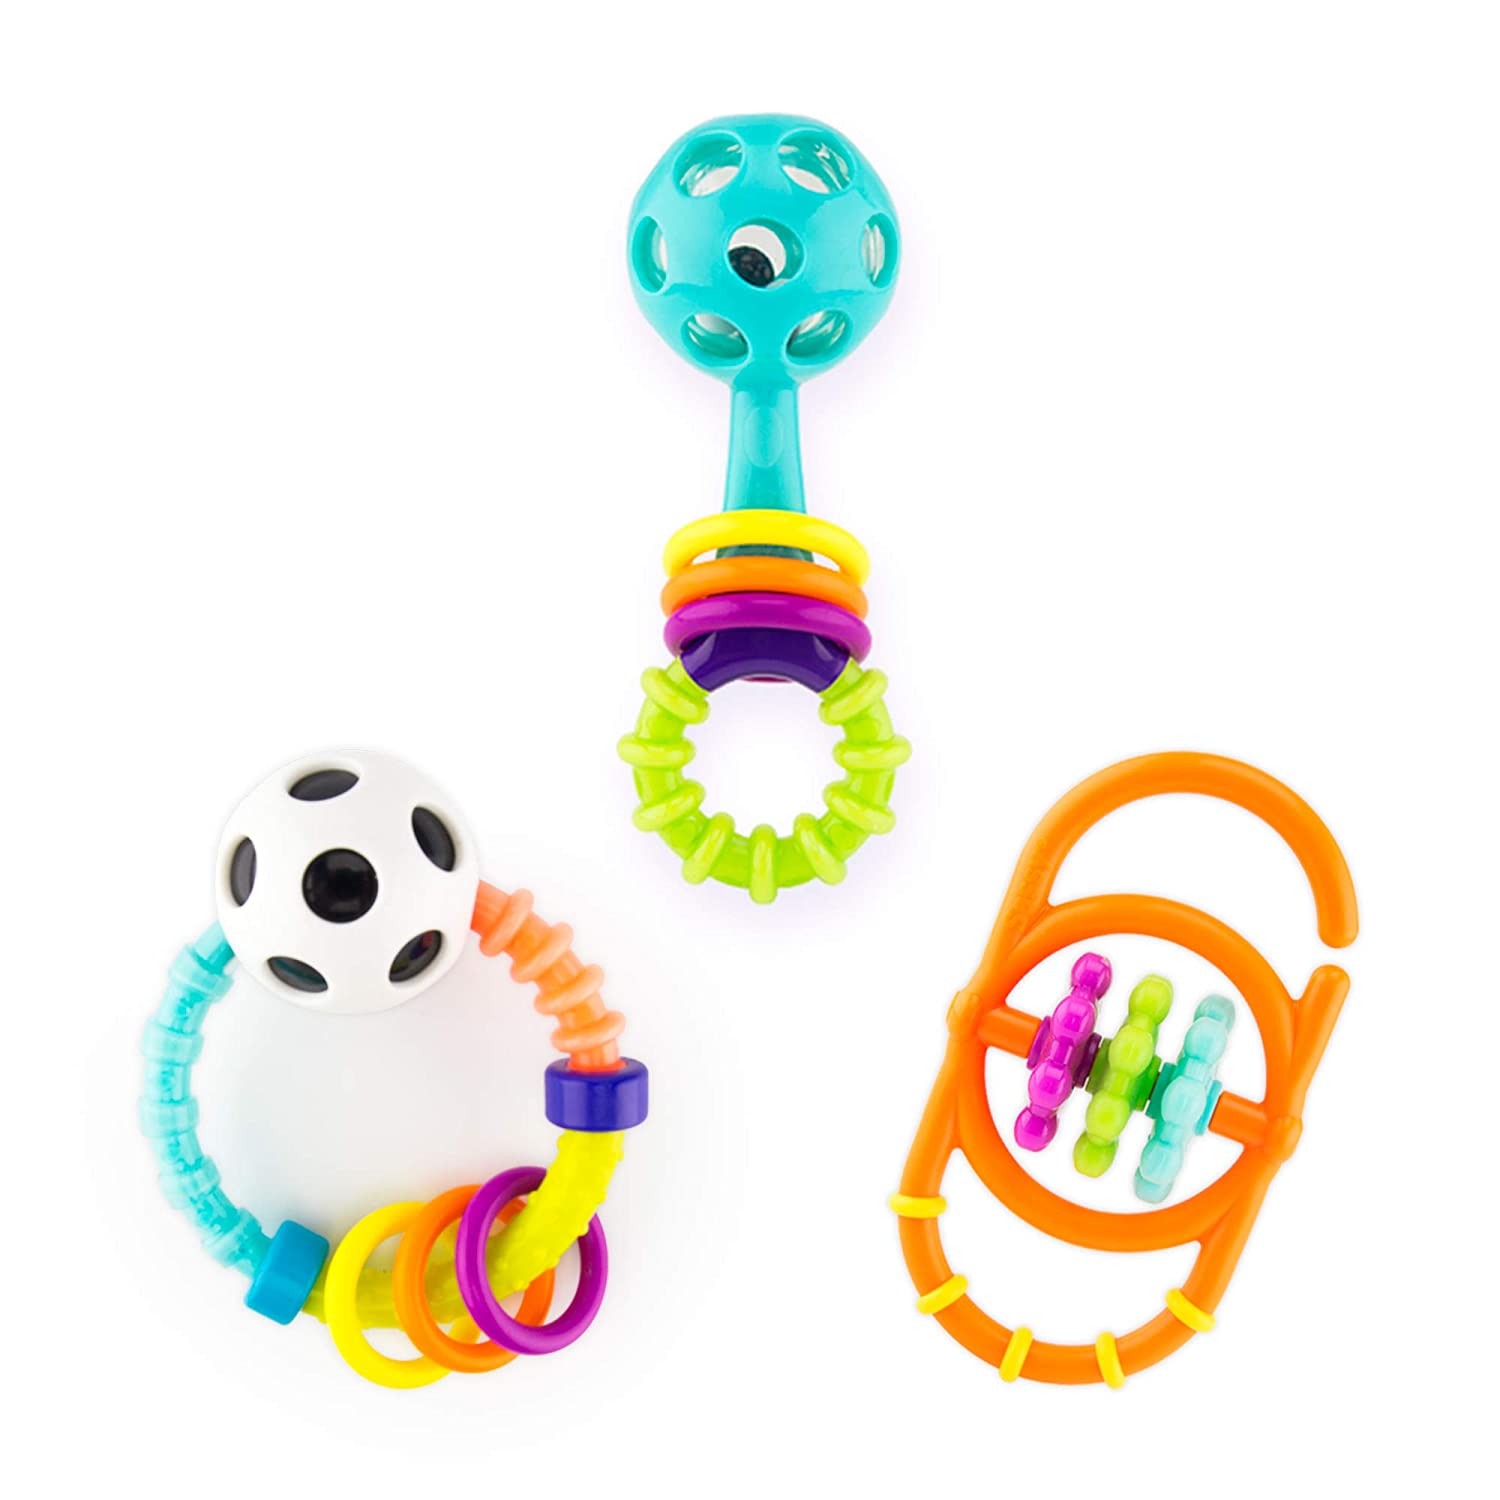 Sassy My First Rattles Contrasting Colors Baby Rattles, 3-Pack